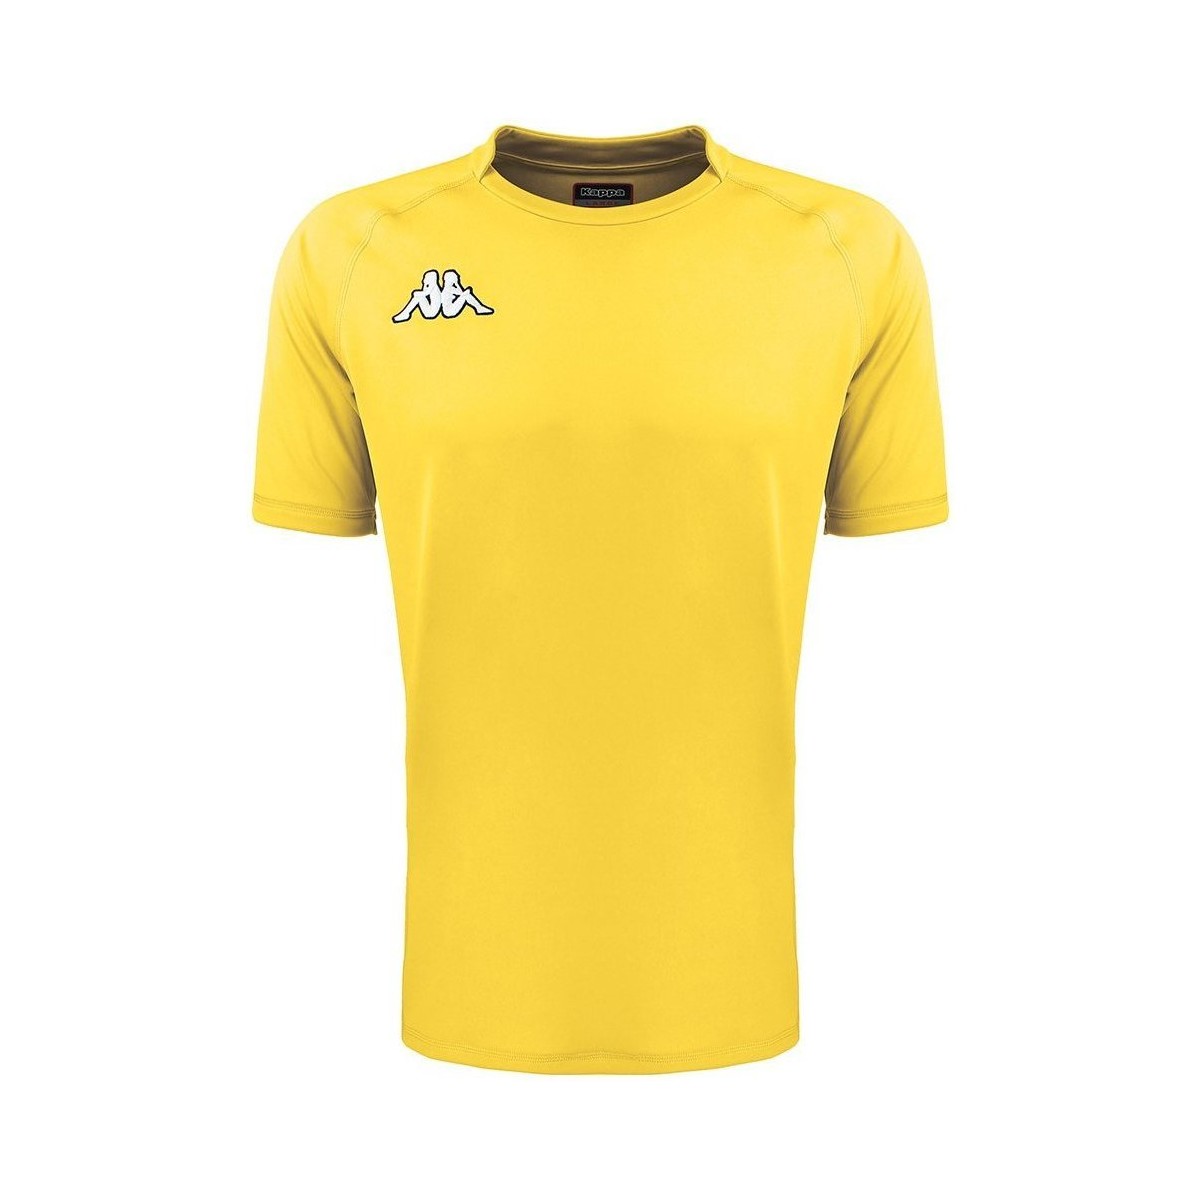 Kappa Jaune Maillot Rugby Telese O5ReglCp